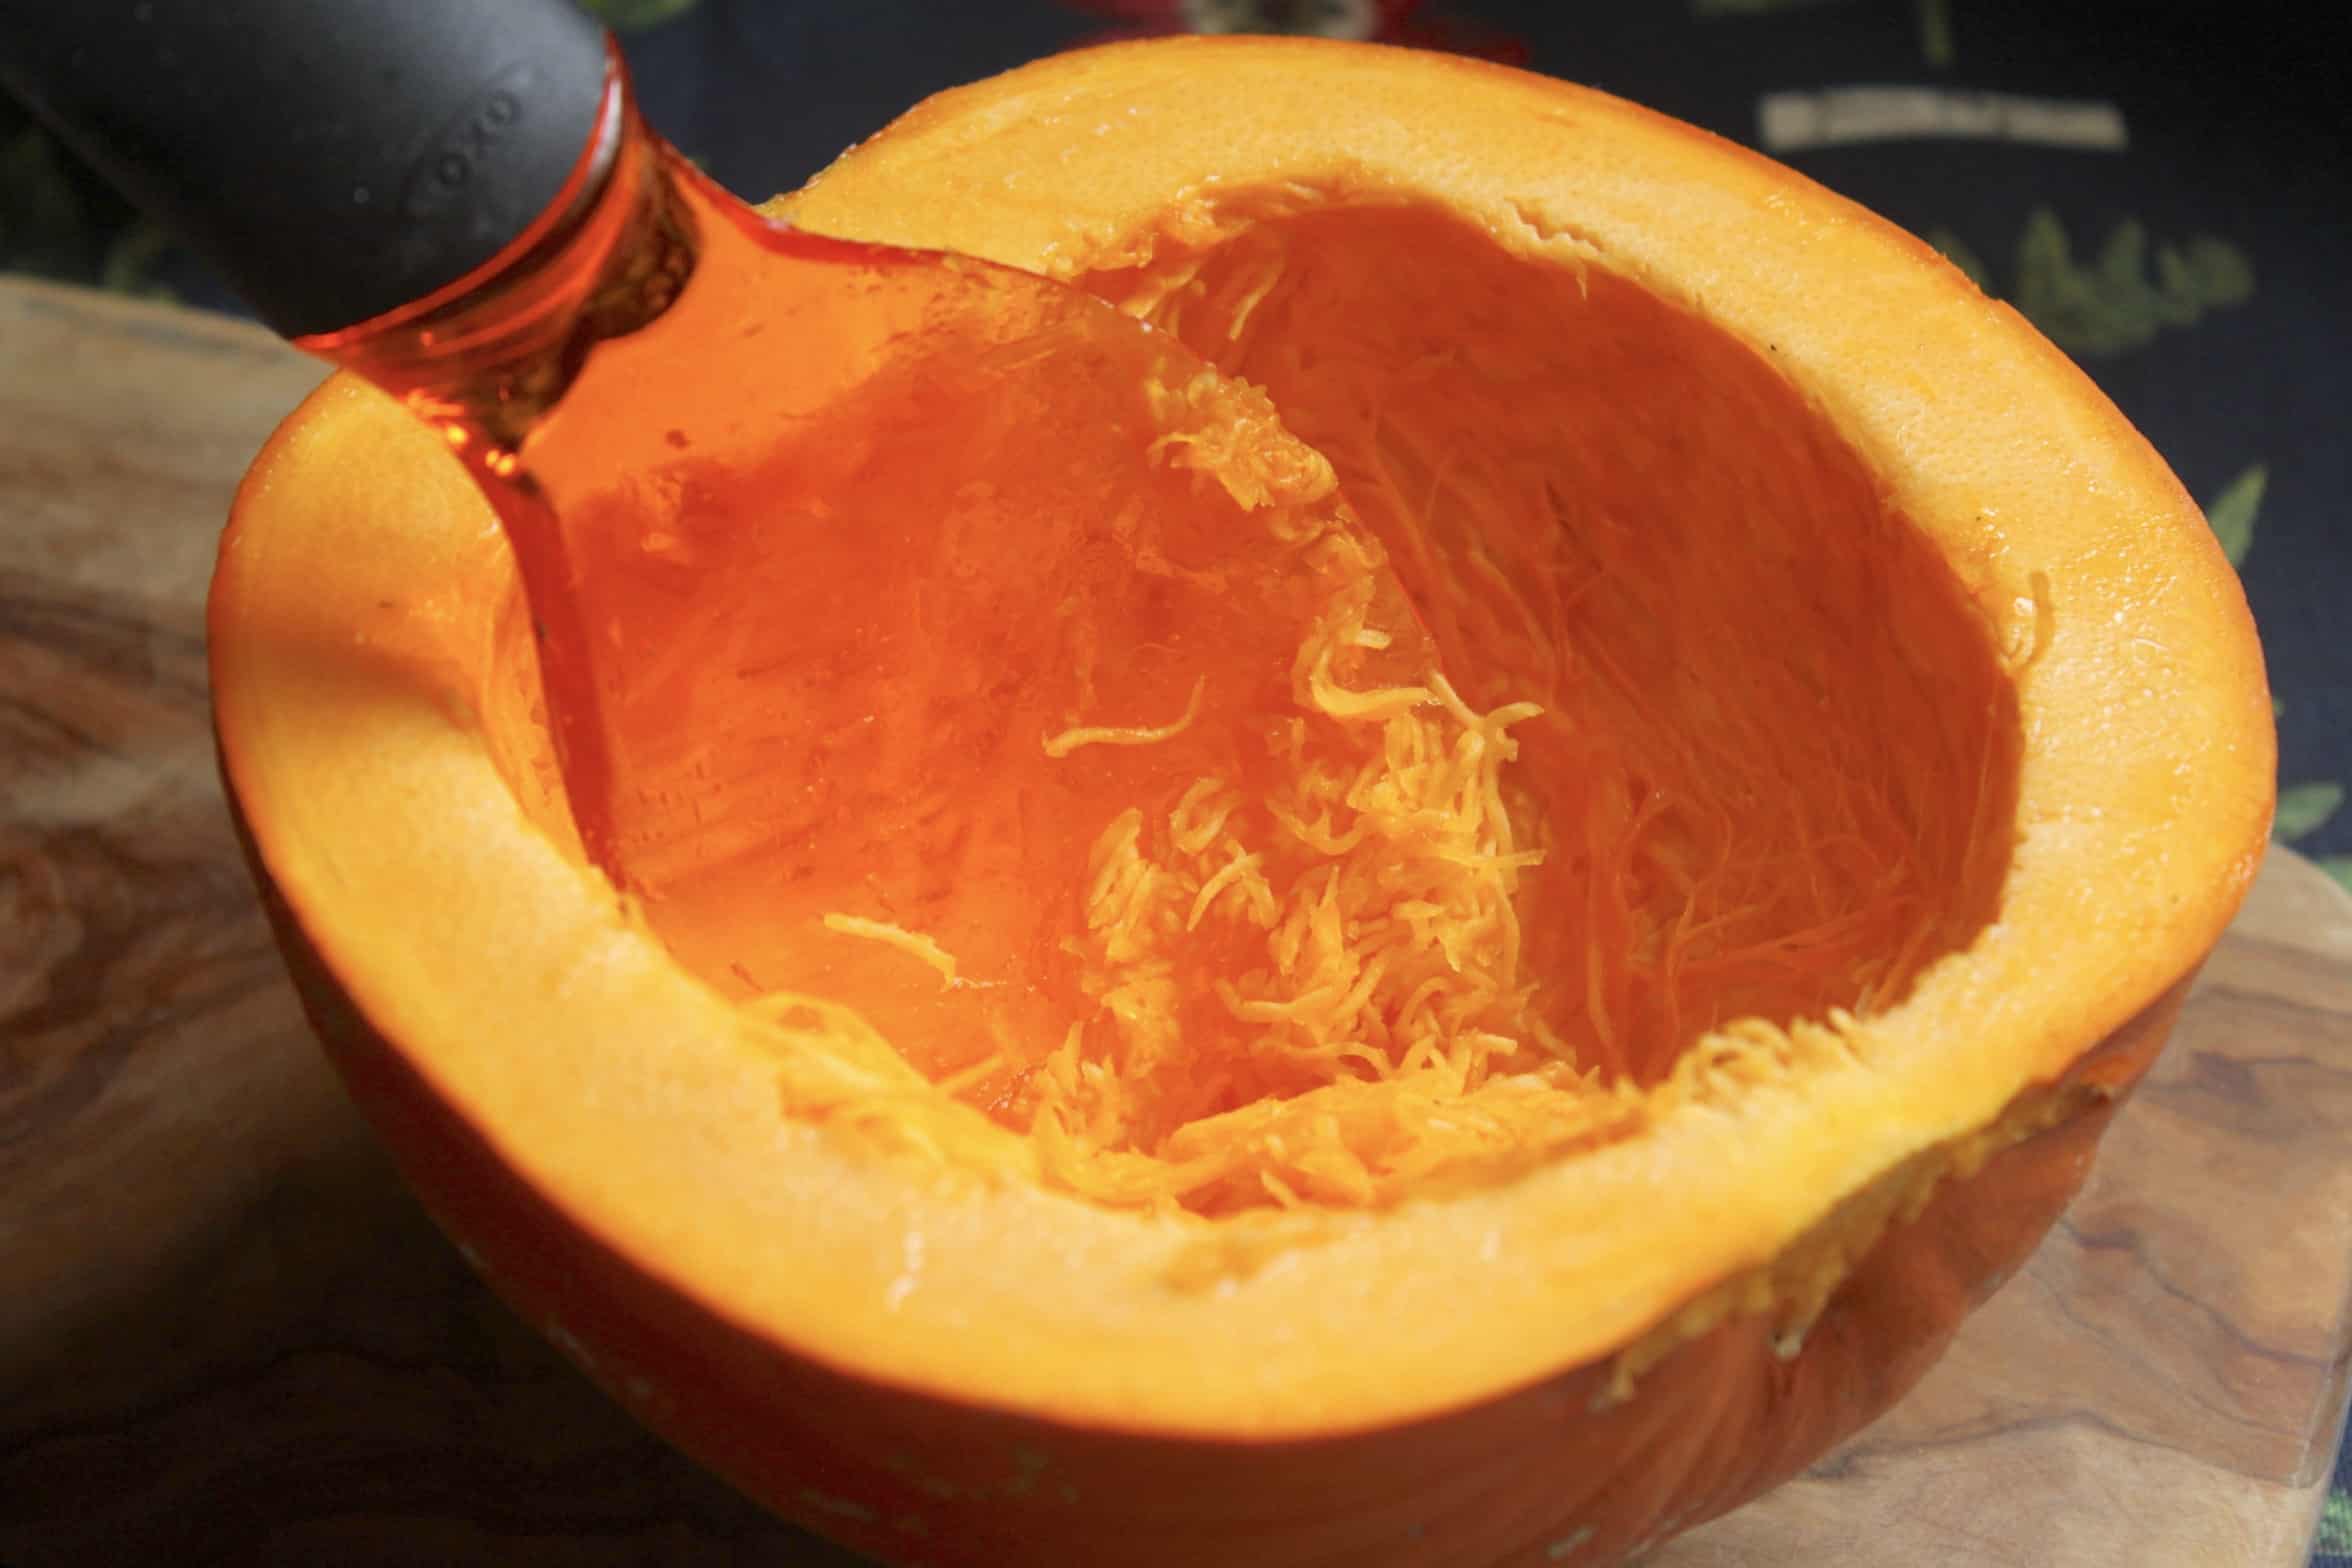 cleaning out a pumpkin